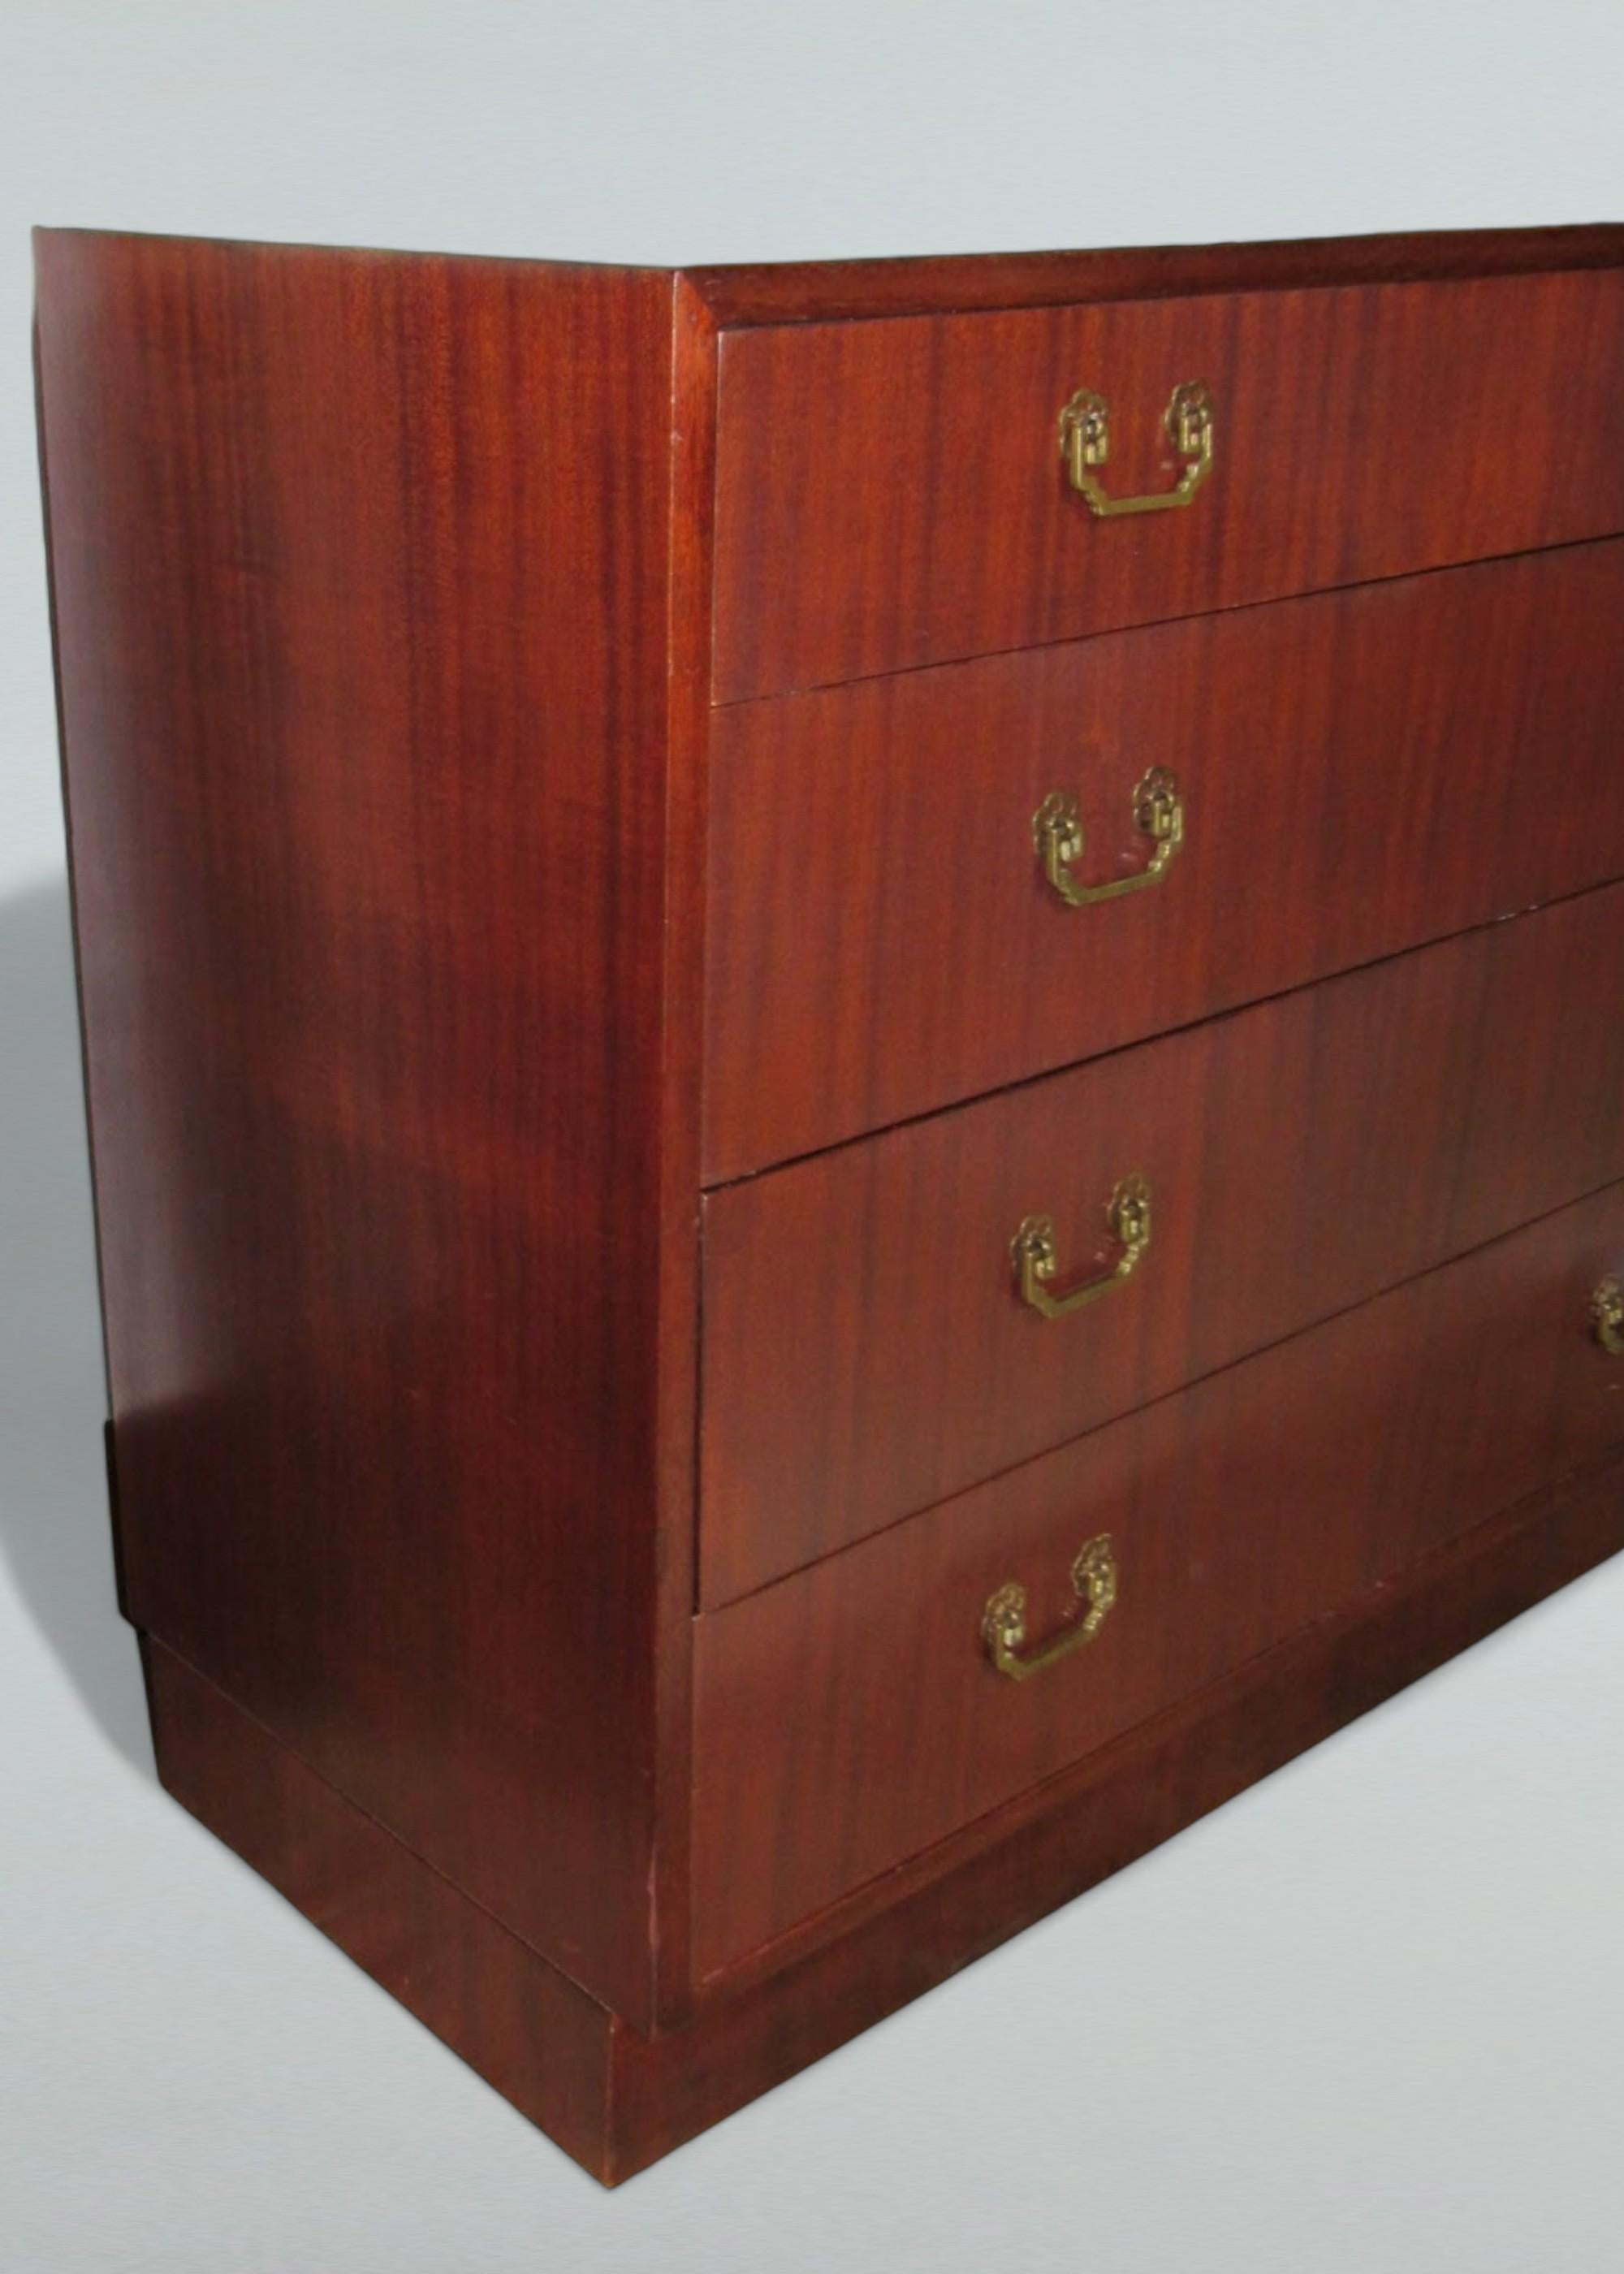 Mahogany Dressers Four-Drawer Matched Pair, 1940s For Sale 1